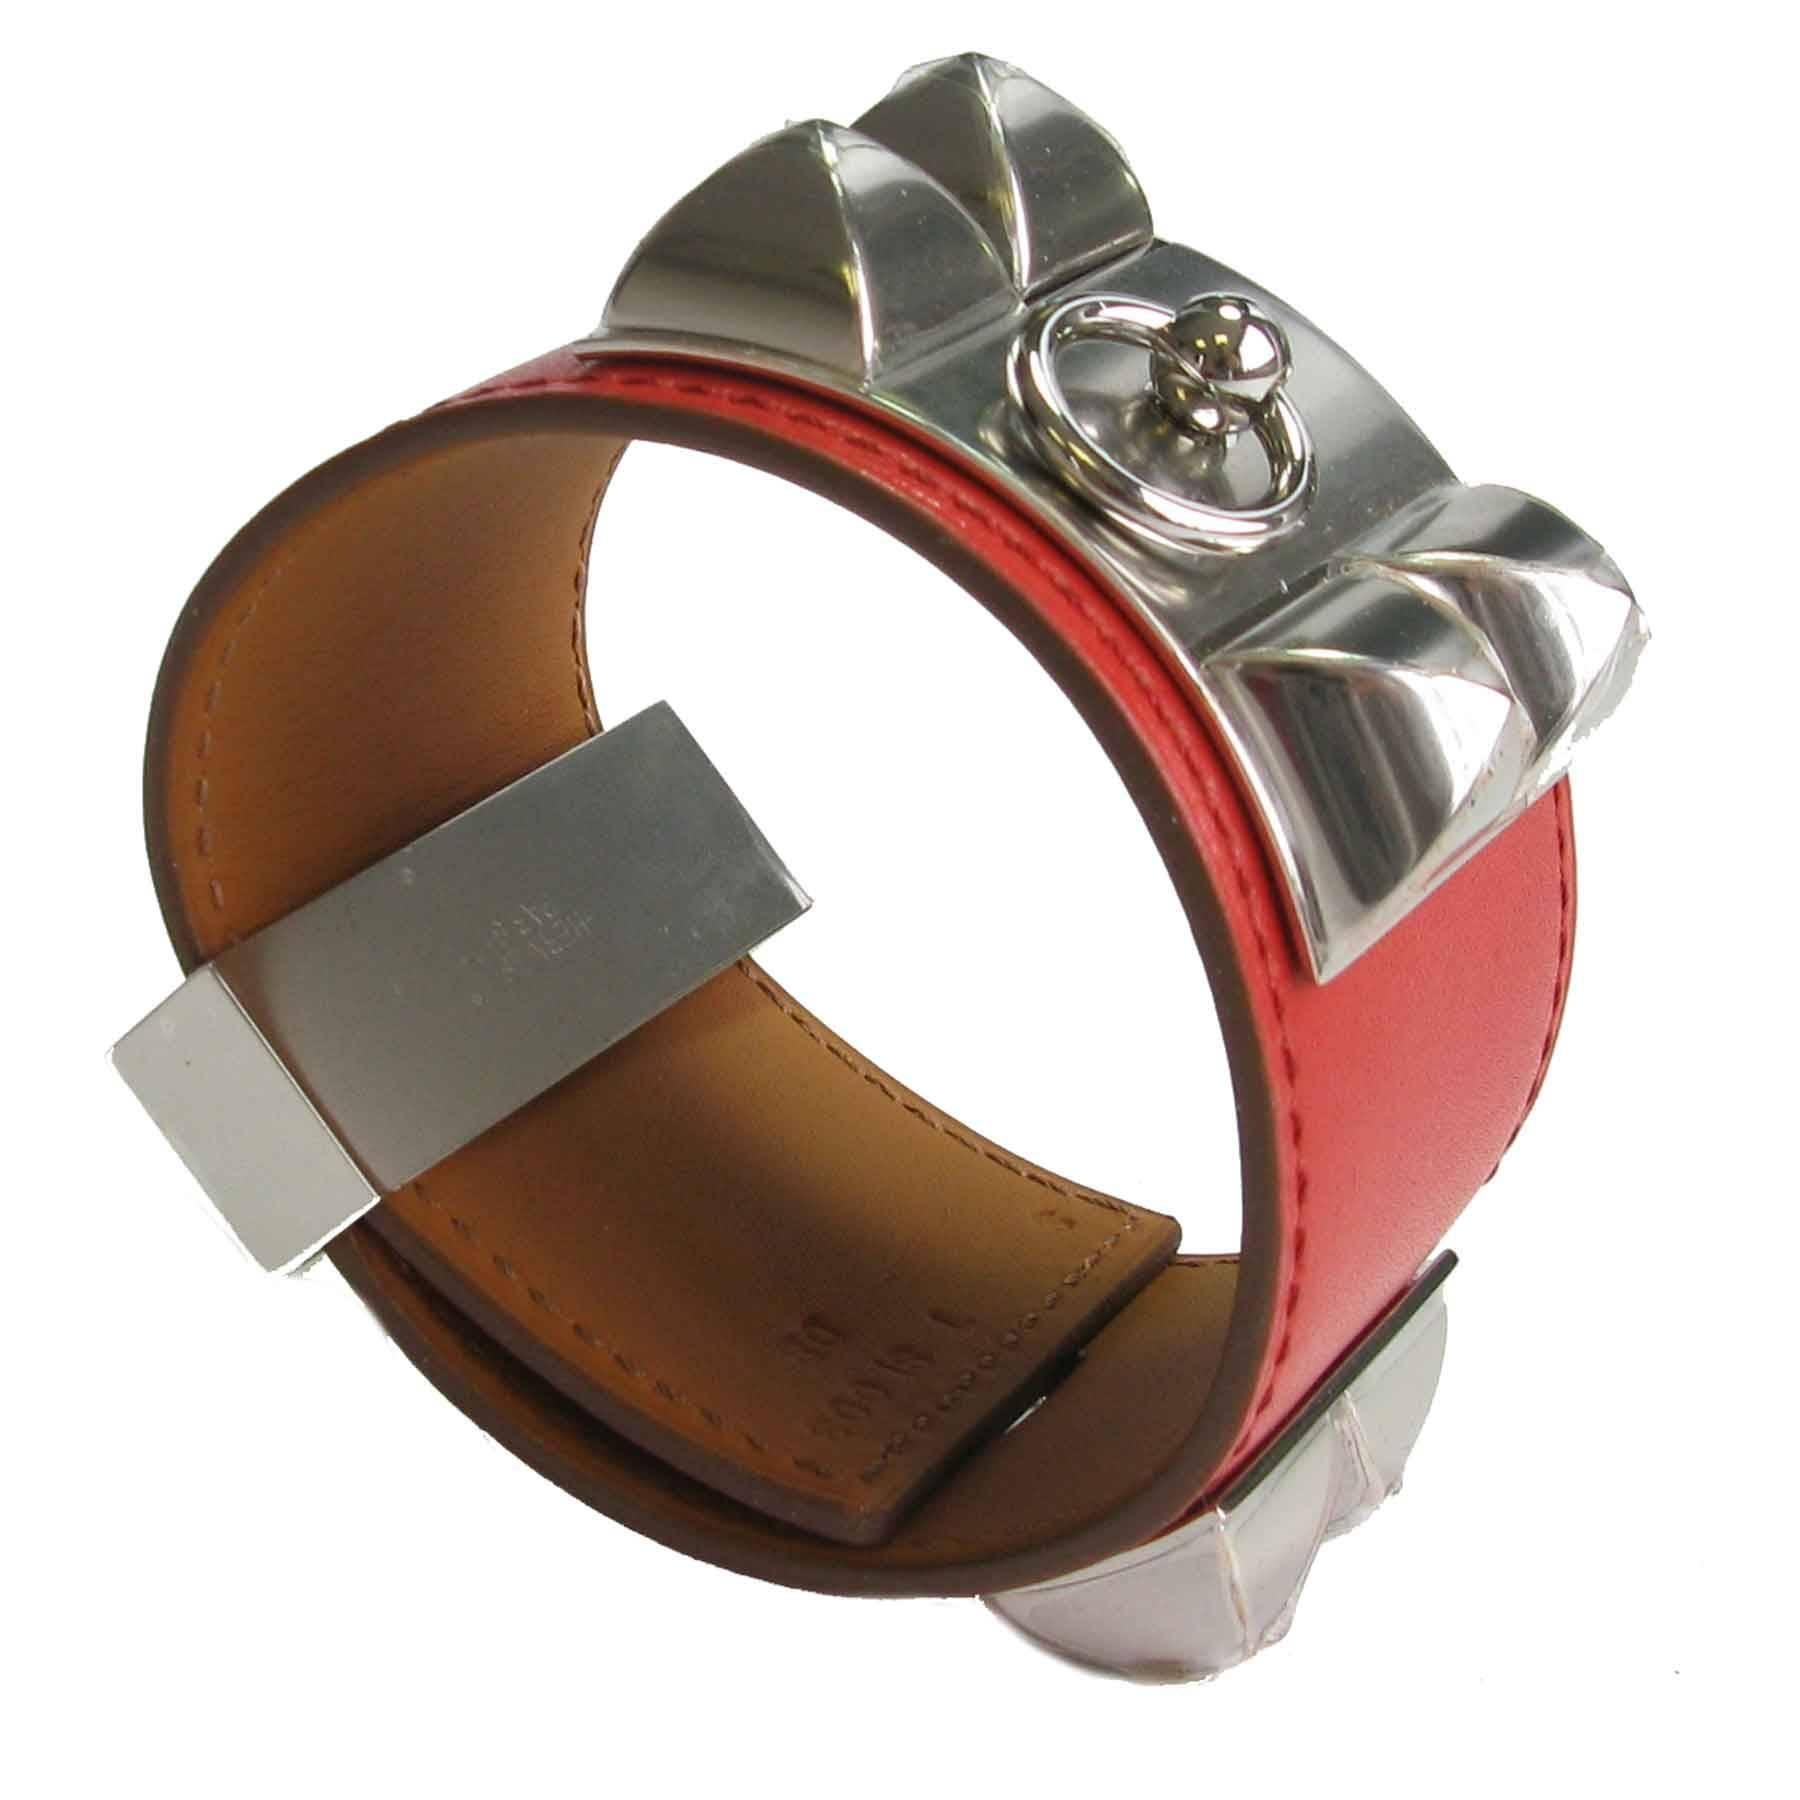 
Hermes  Collier de Chien CDC Cuff Bracelet in calf leather tadelakt sanguine color, fittings in palladium silver.

Letter T, year 2015.

Dimensions:  from the clasp to the first hole 16 cm, in the middle 18 cm, the last hole 19 cm.

Delivered in a